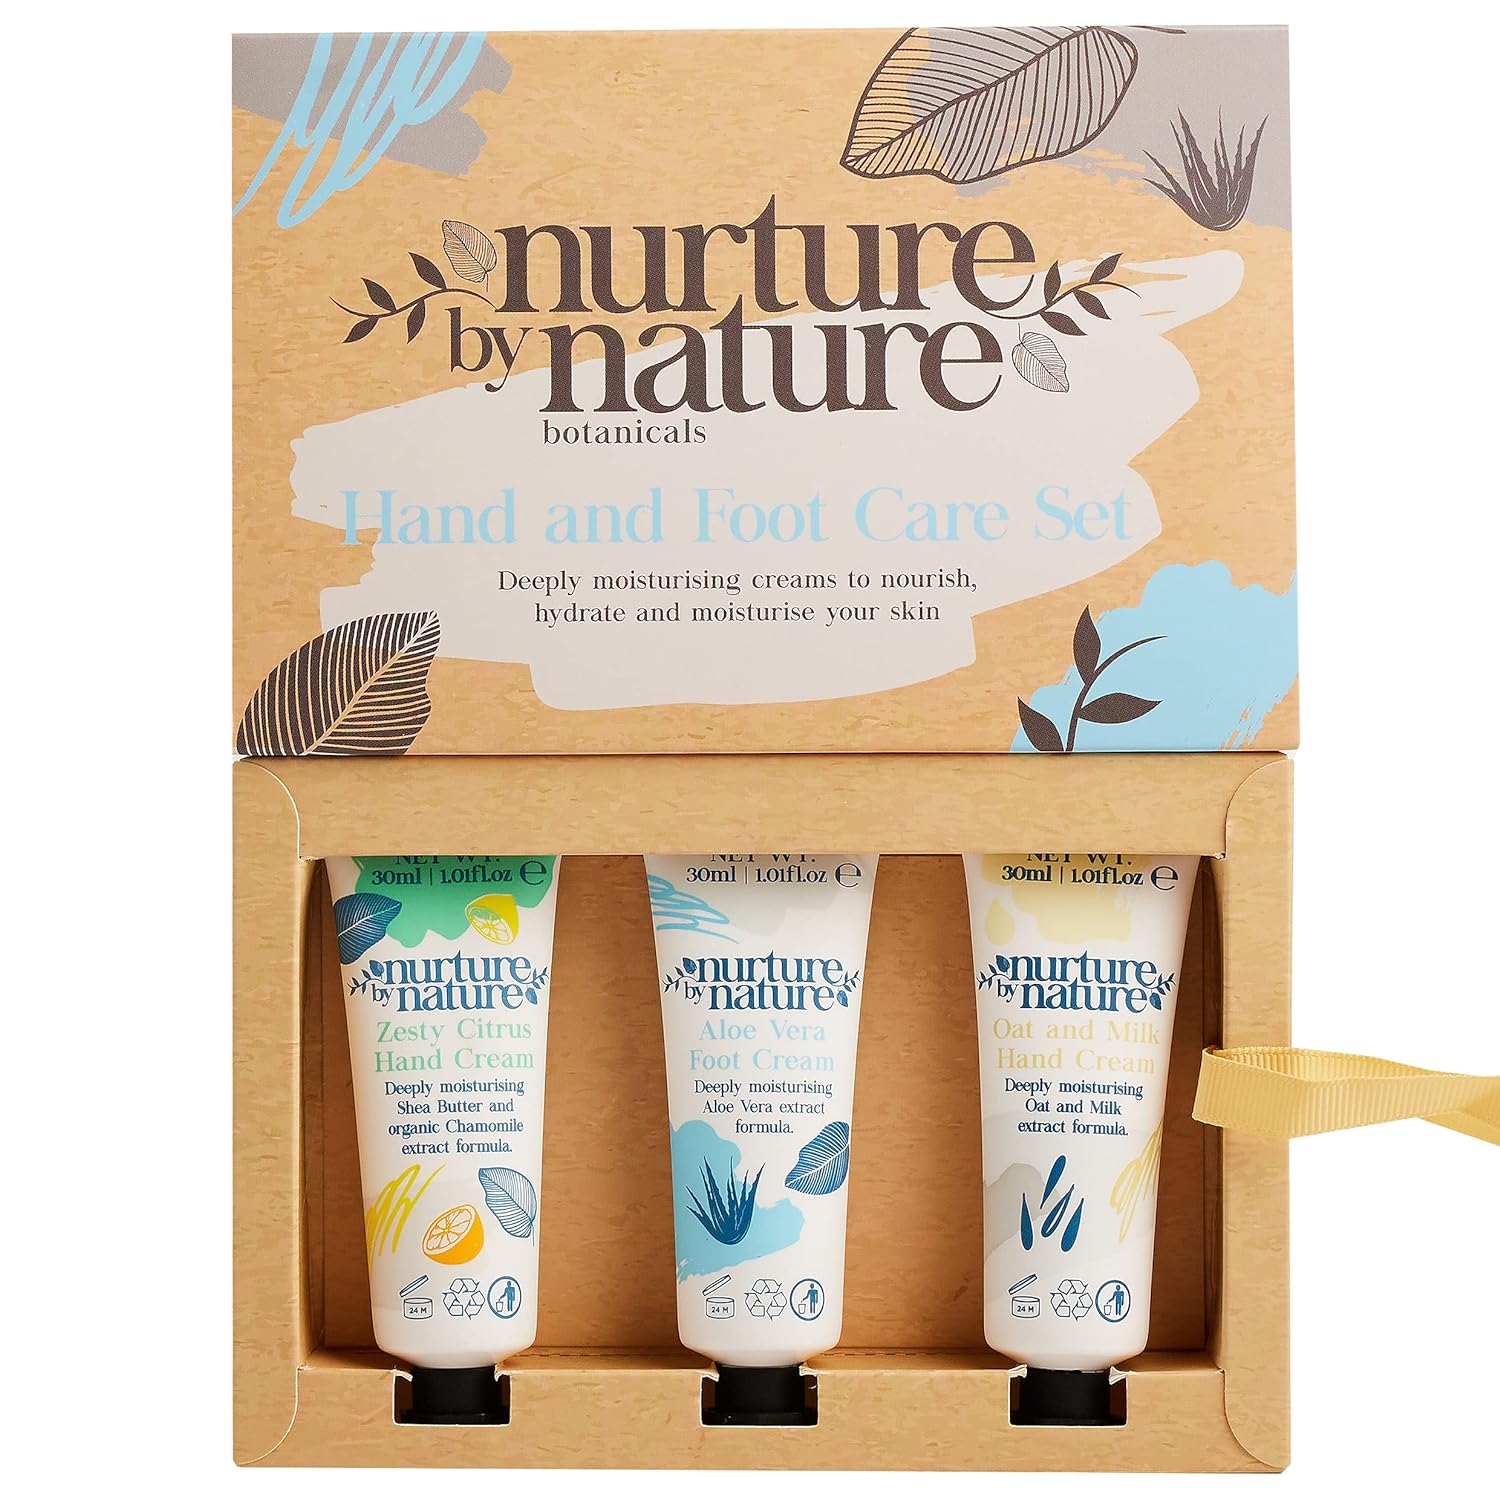 Hand and Foot Lotion Set